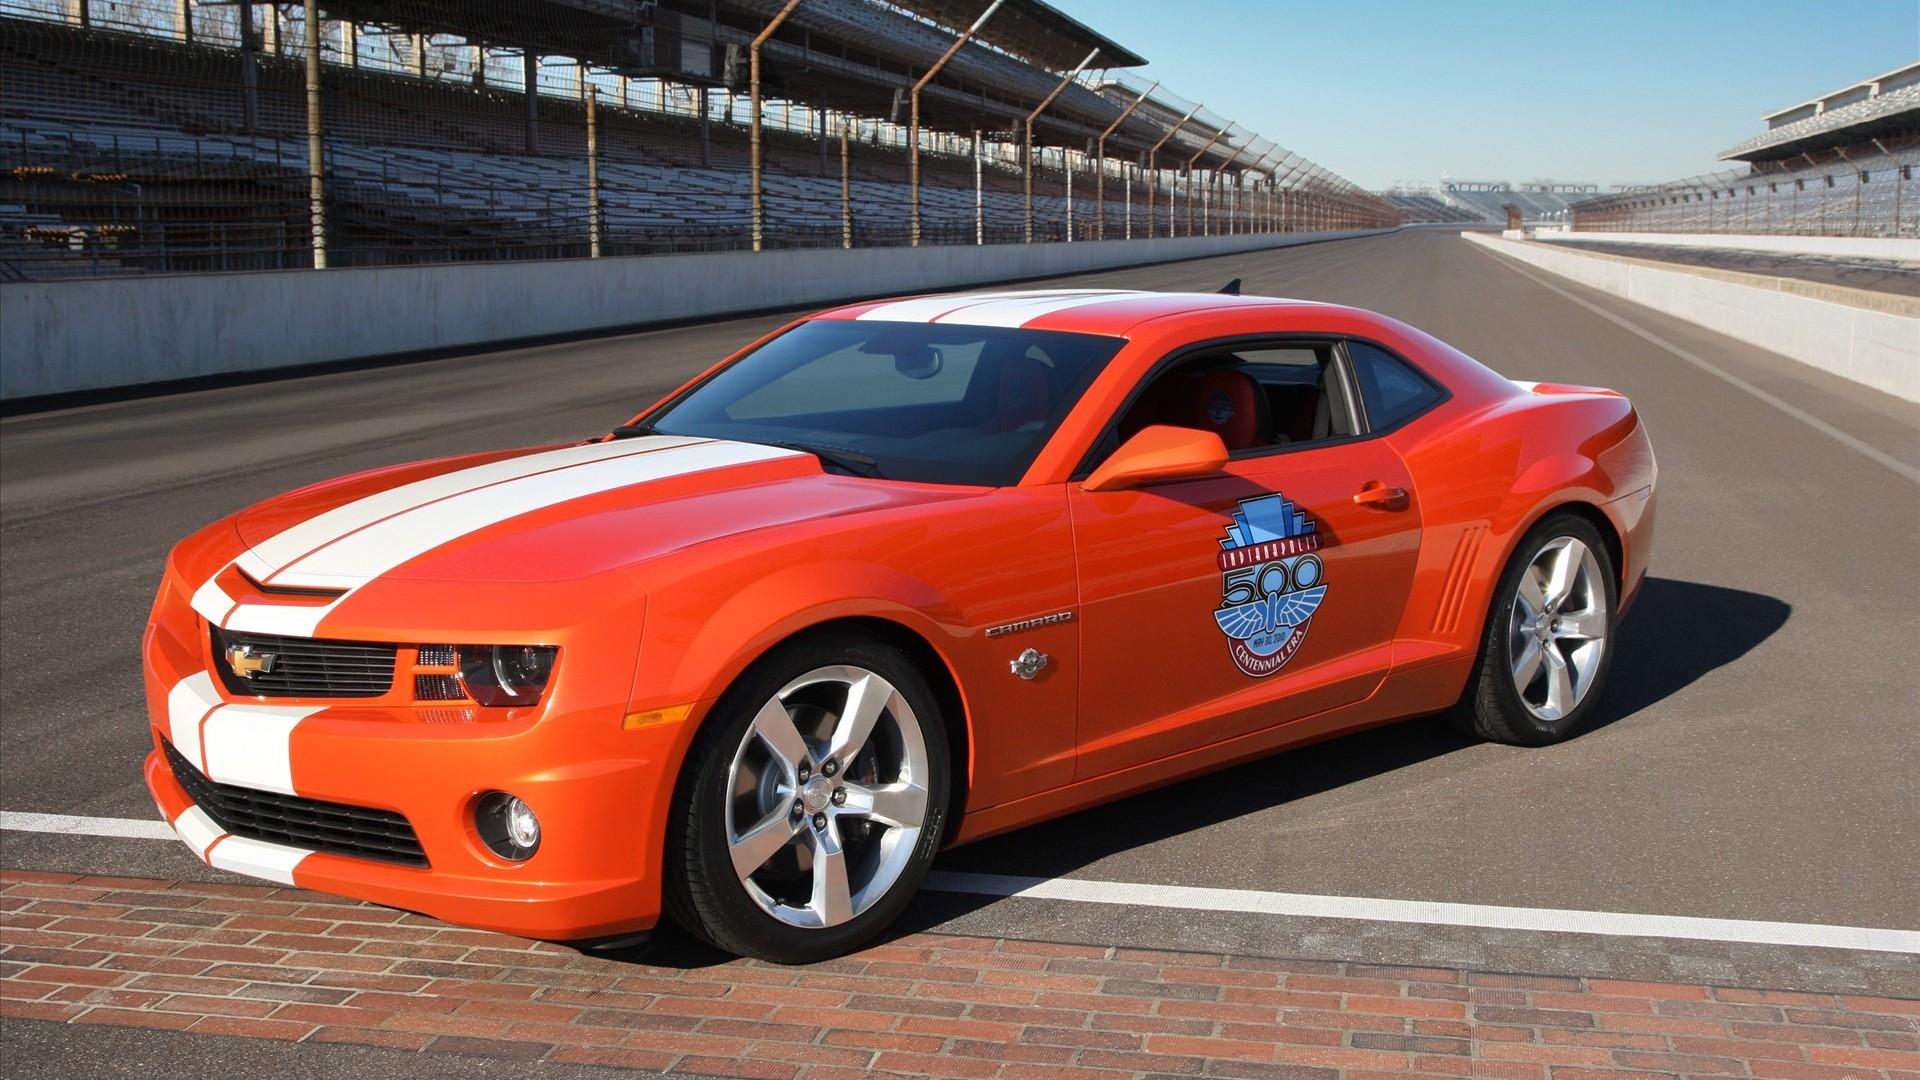 Red Chevrolet Camaro Indianapolis Pace Car High Quality Wallpaper